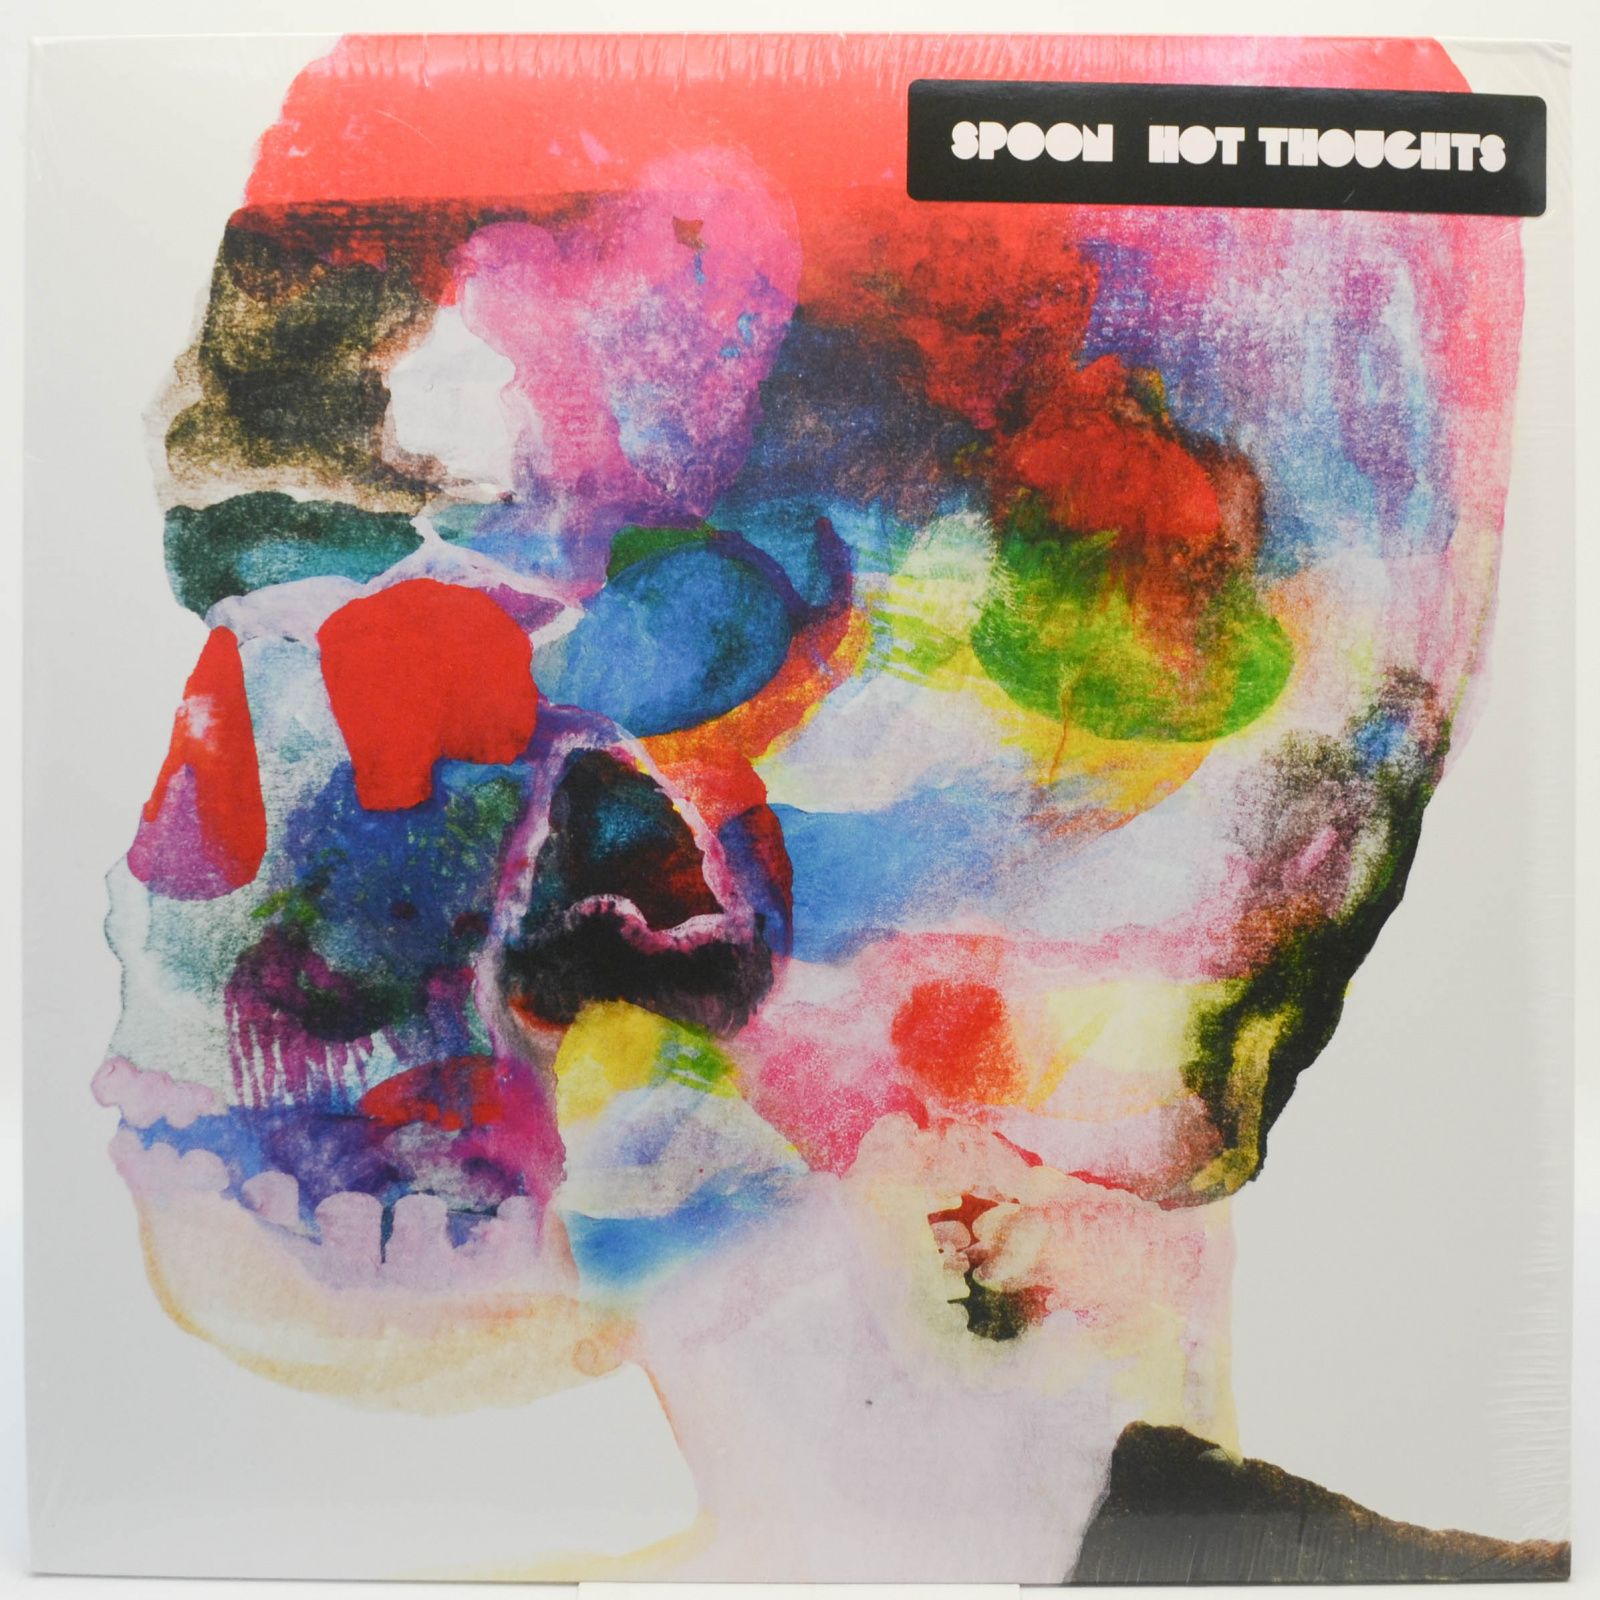 Spoon — Hot Thoughts, 2017